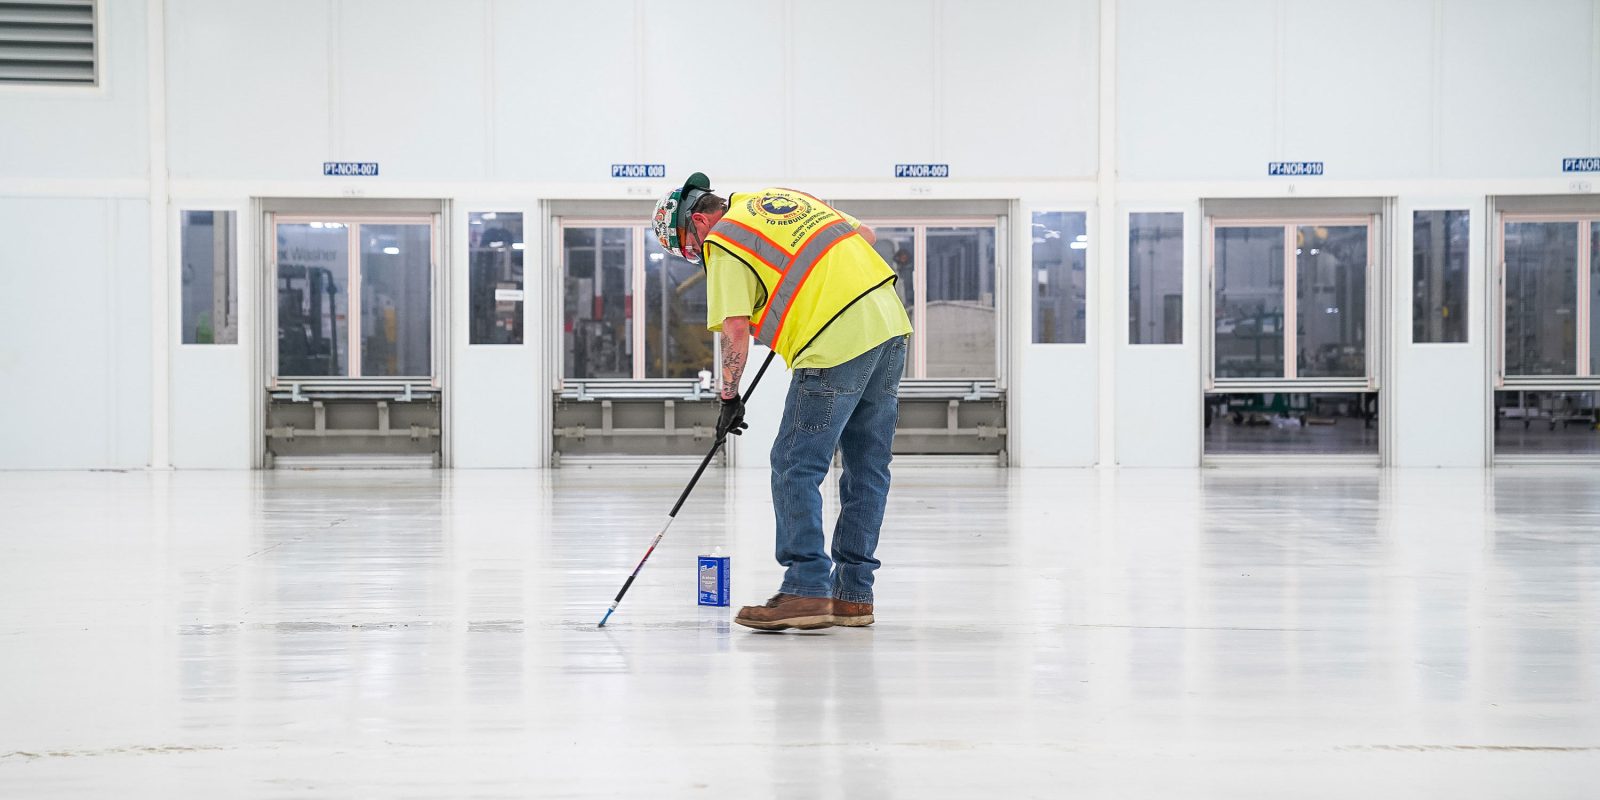 A worker prepares a cleanroom to produce surgical masks at GM’s Warren, Michigan manufacturing facility.